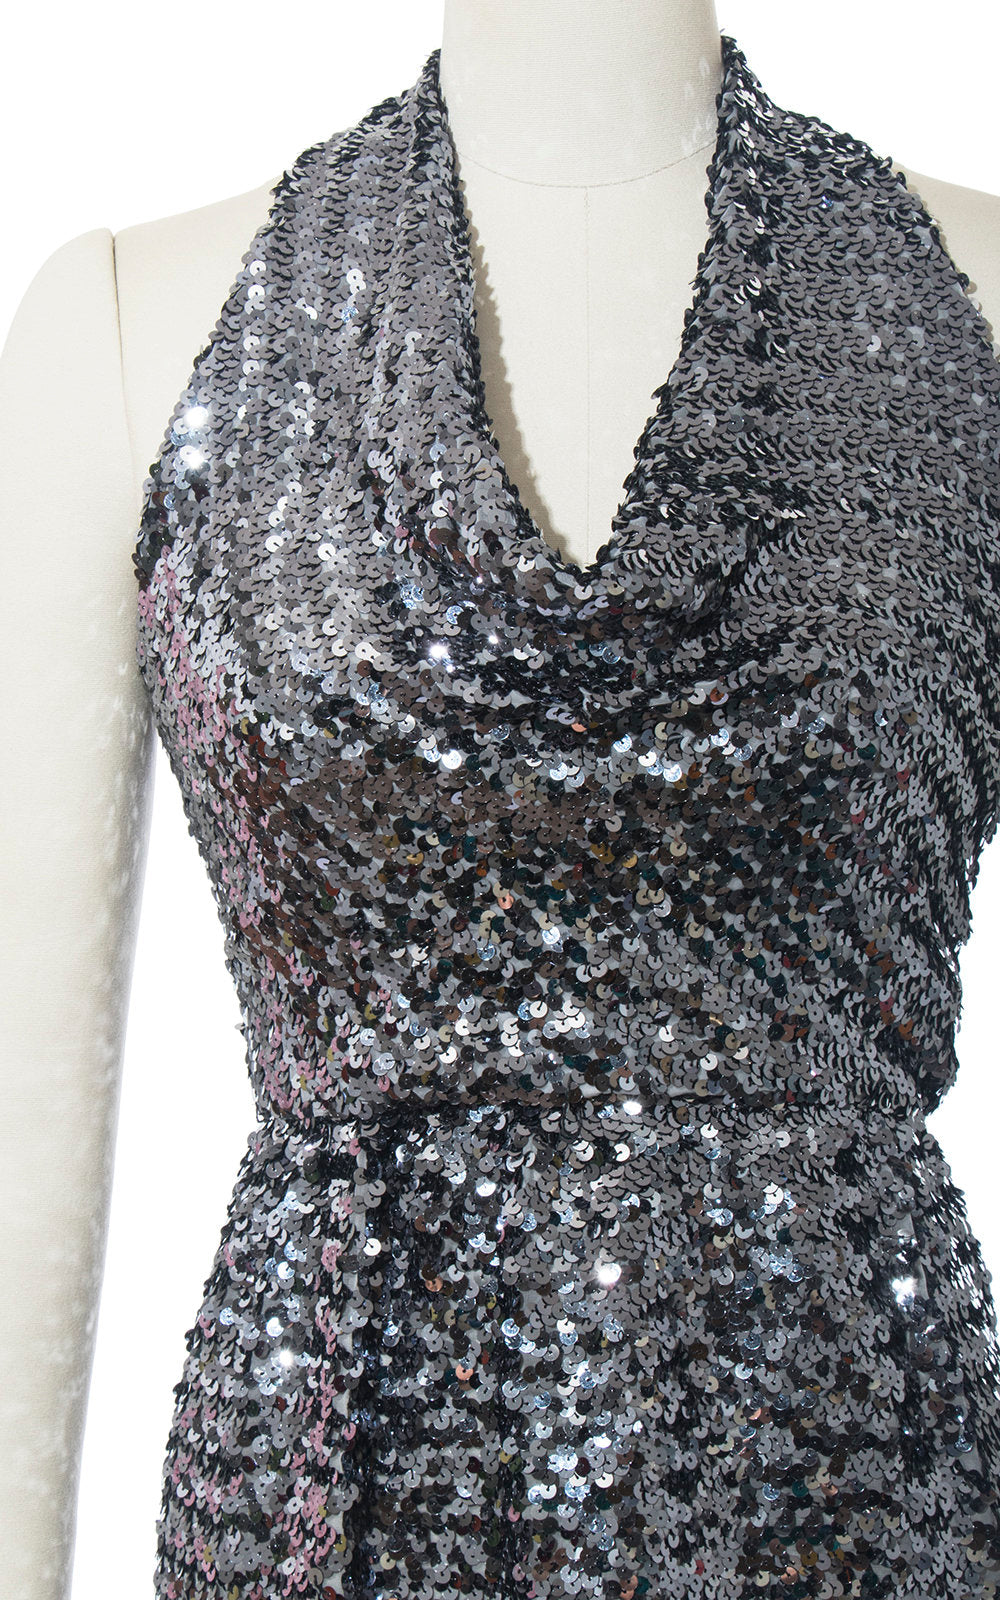 Vintage 1970s Dress | 70s Sequin Halter Sparkly Silver Cowl Halter Neck Wiggle Party Dress (small)